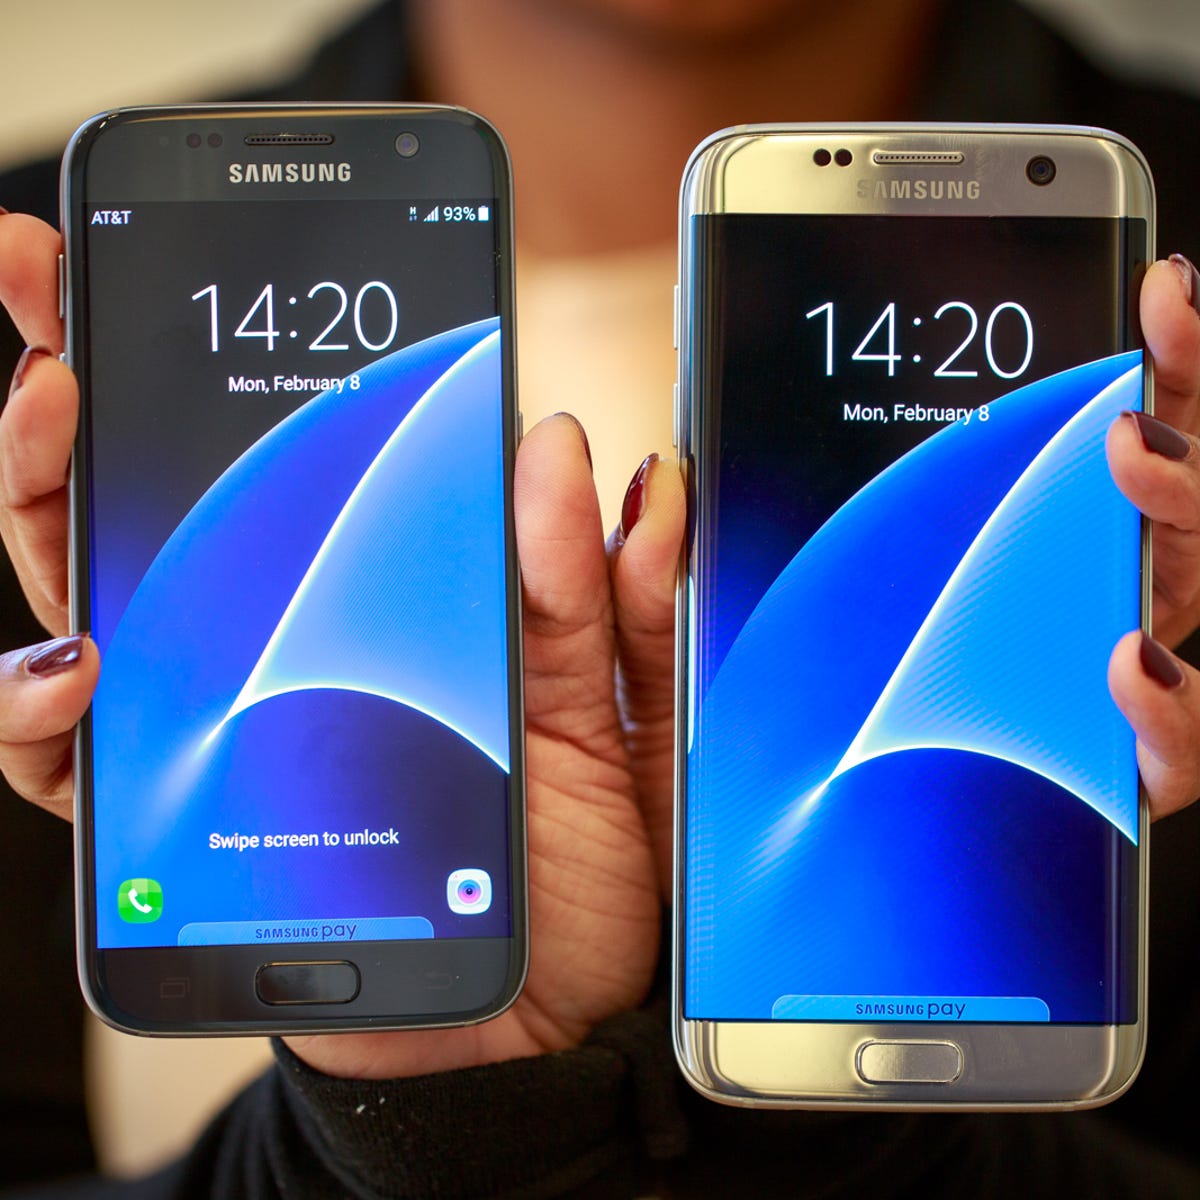 Meekness Medical malpractice Boil Samsung Galaxy S7 and S7 Edge vs Galaxy S6, S6 Edge, Note 5 and S6+ - CNET